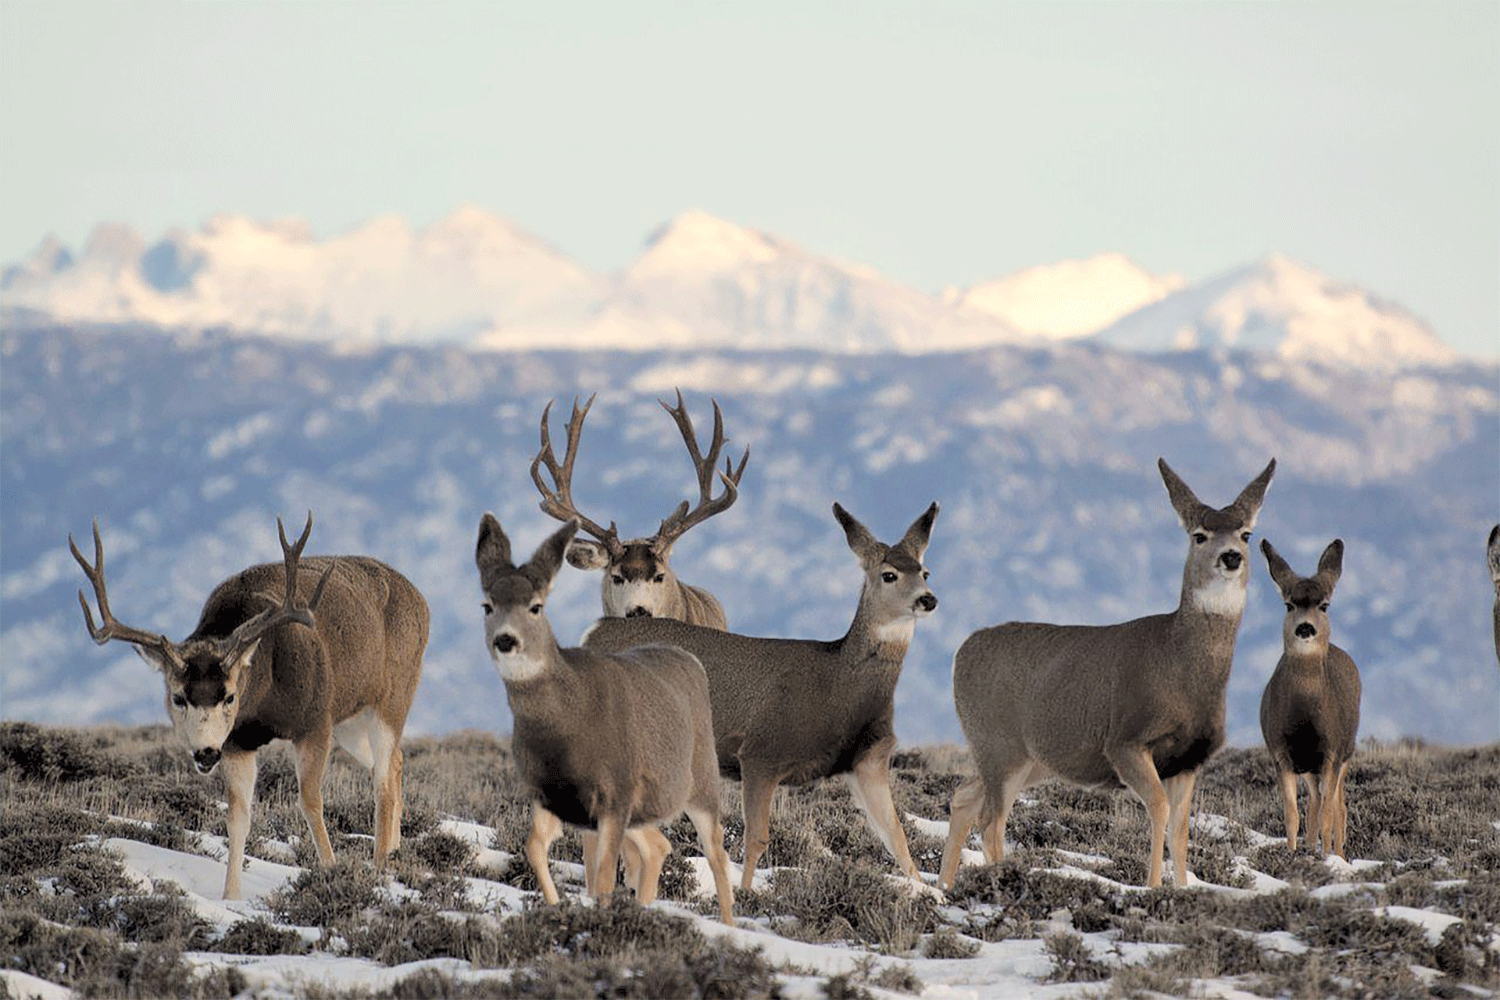 Six mule deer walk through patches of snow in the mountains.